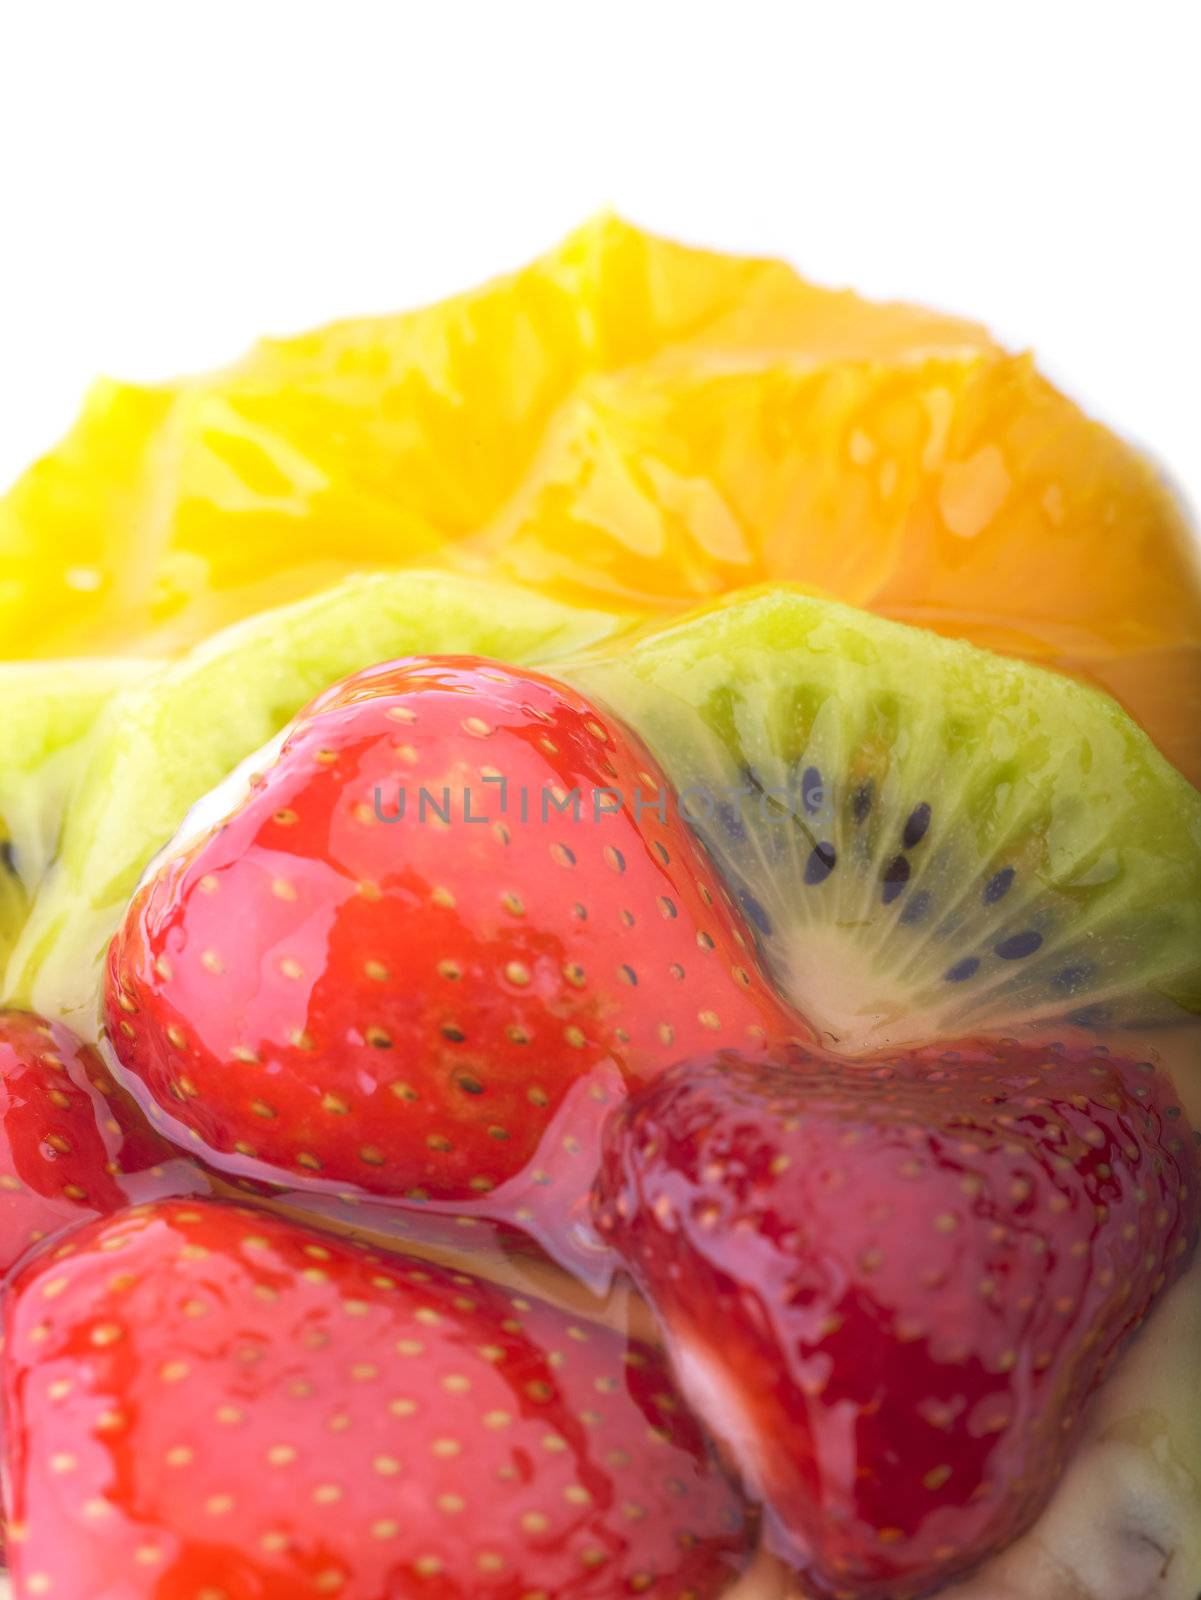 Strawberry Kiwi and Orange in jelly cake by adamr